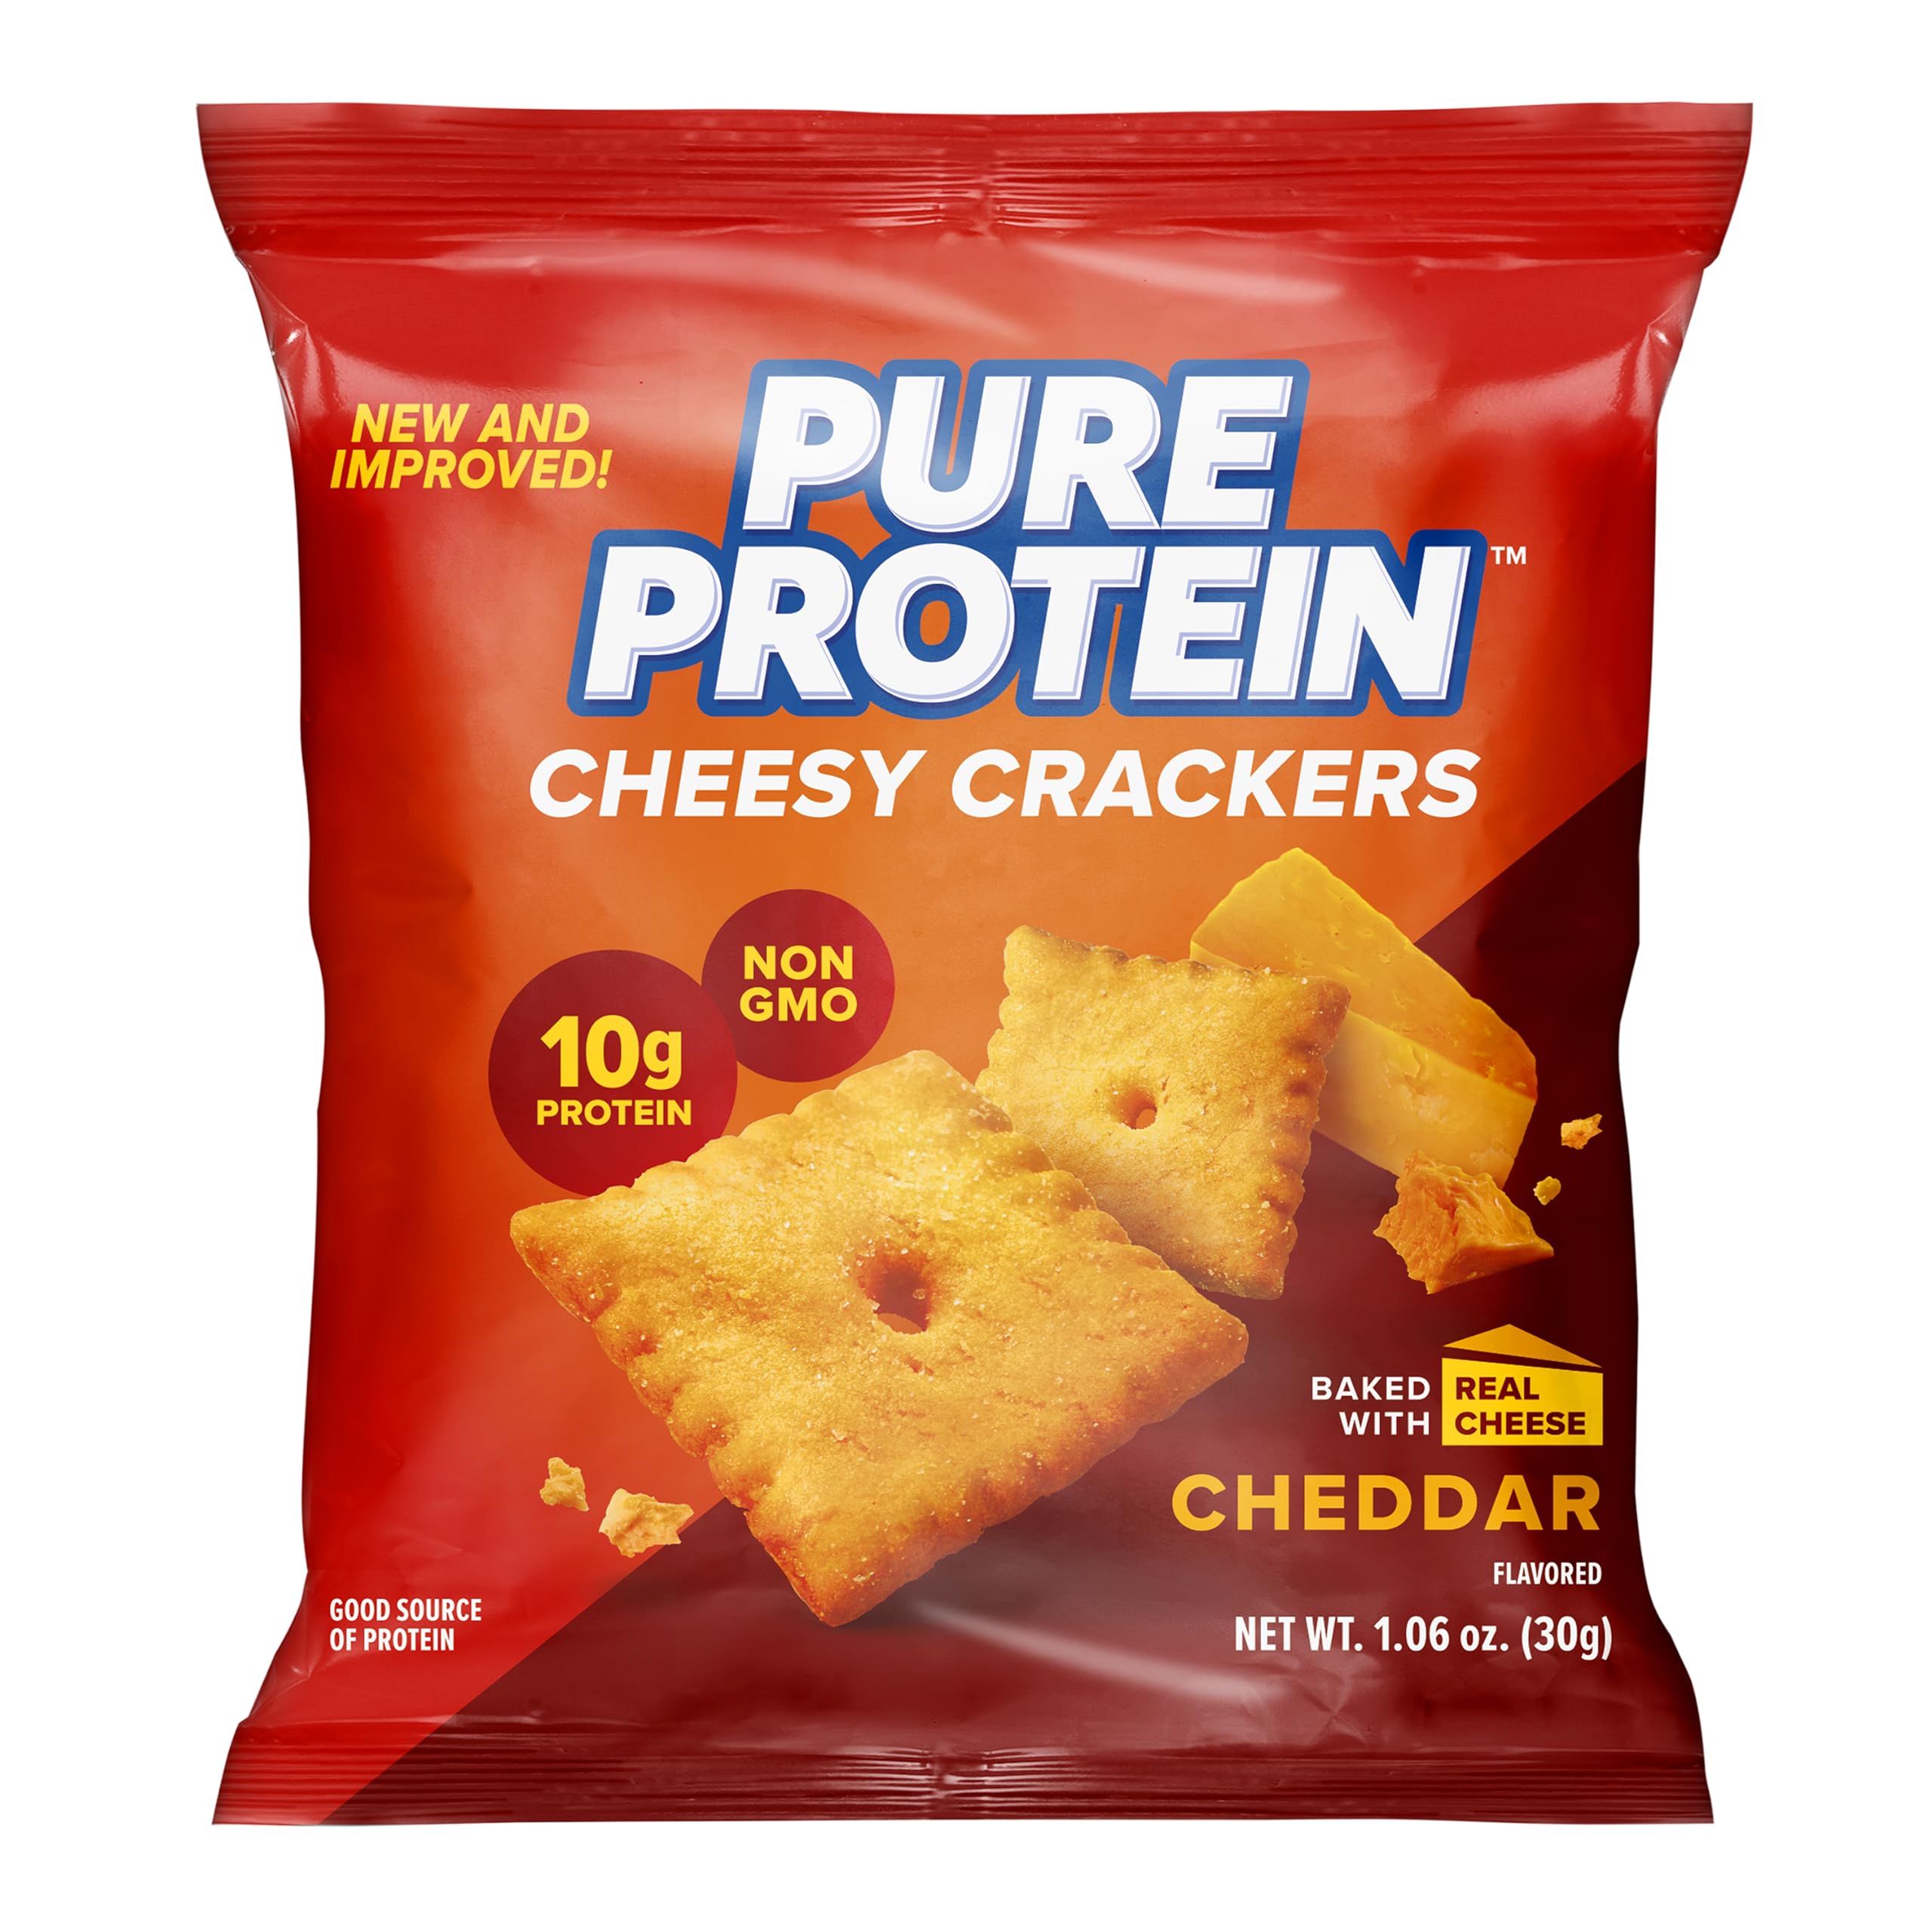 Pure Protein Cheesy Crackers, Cheddar, High Protein Snack, 10G Protein, 1.34 oz, 12 Count